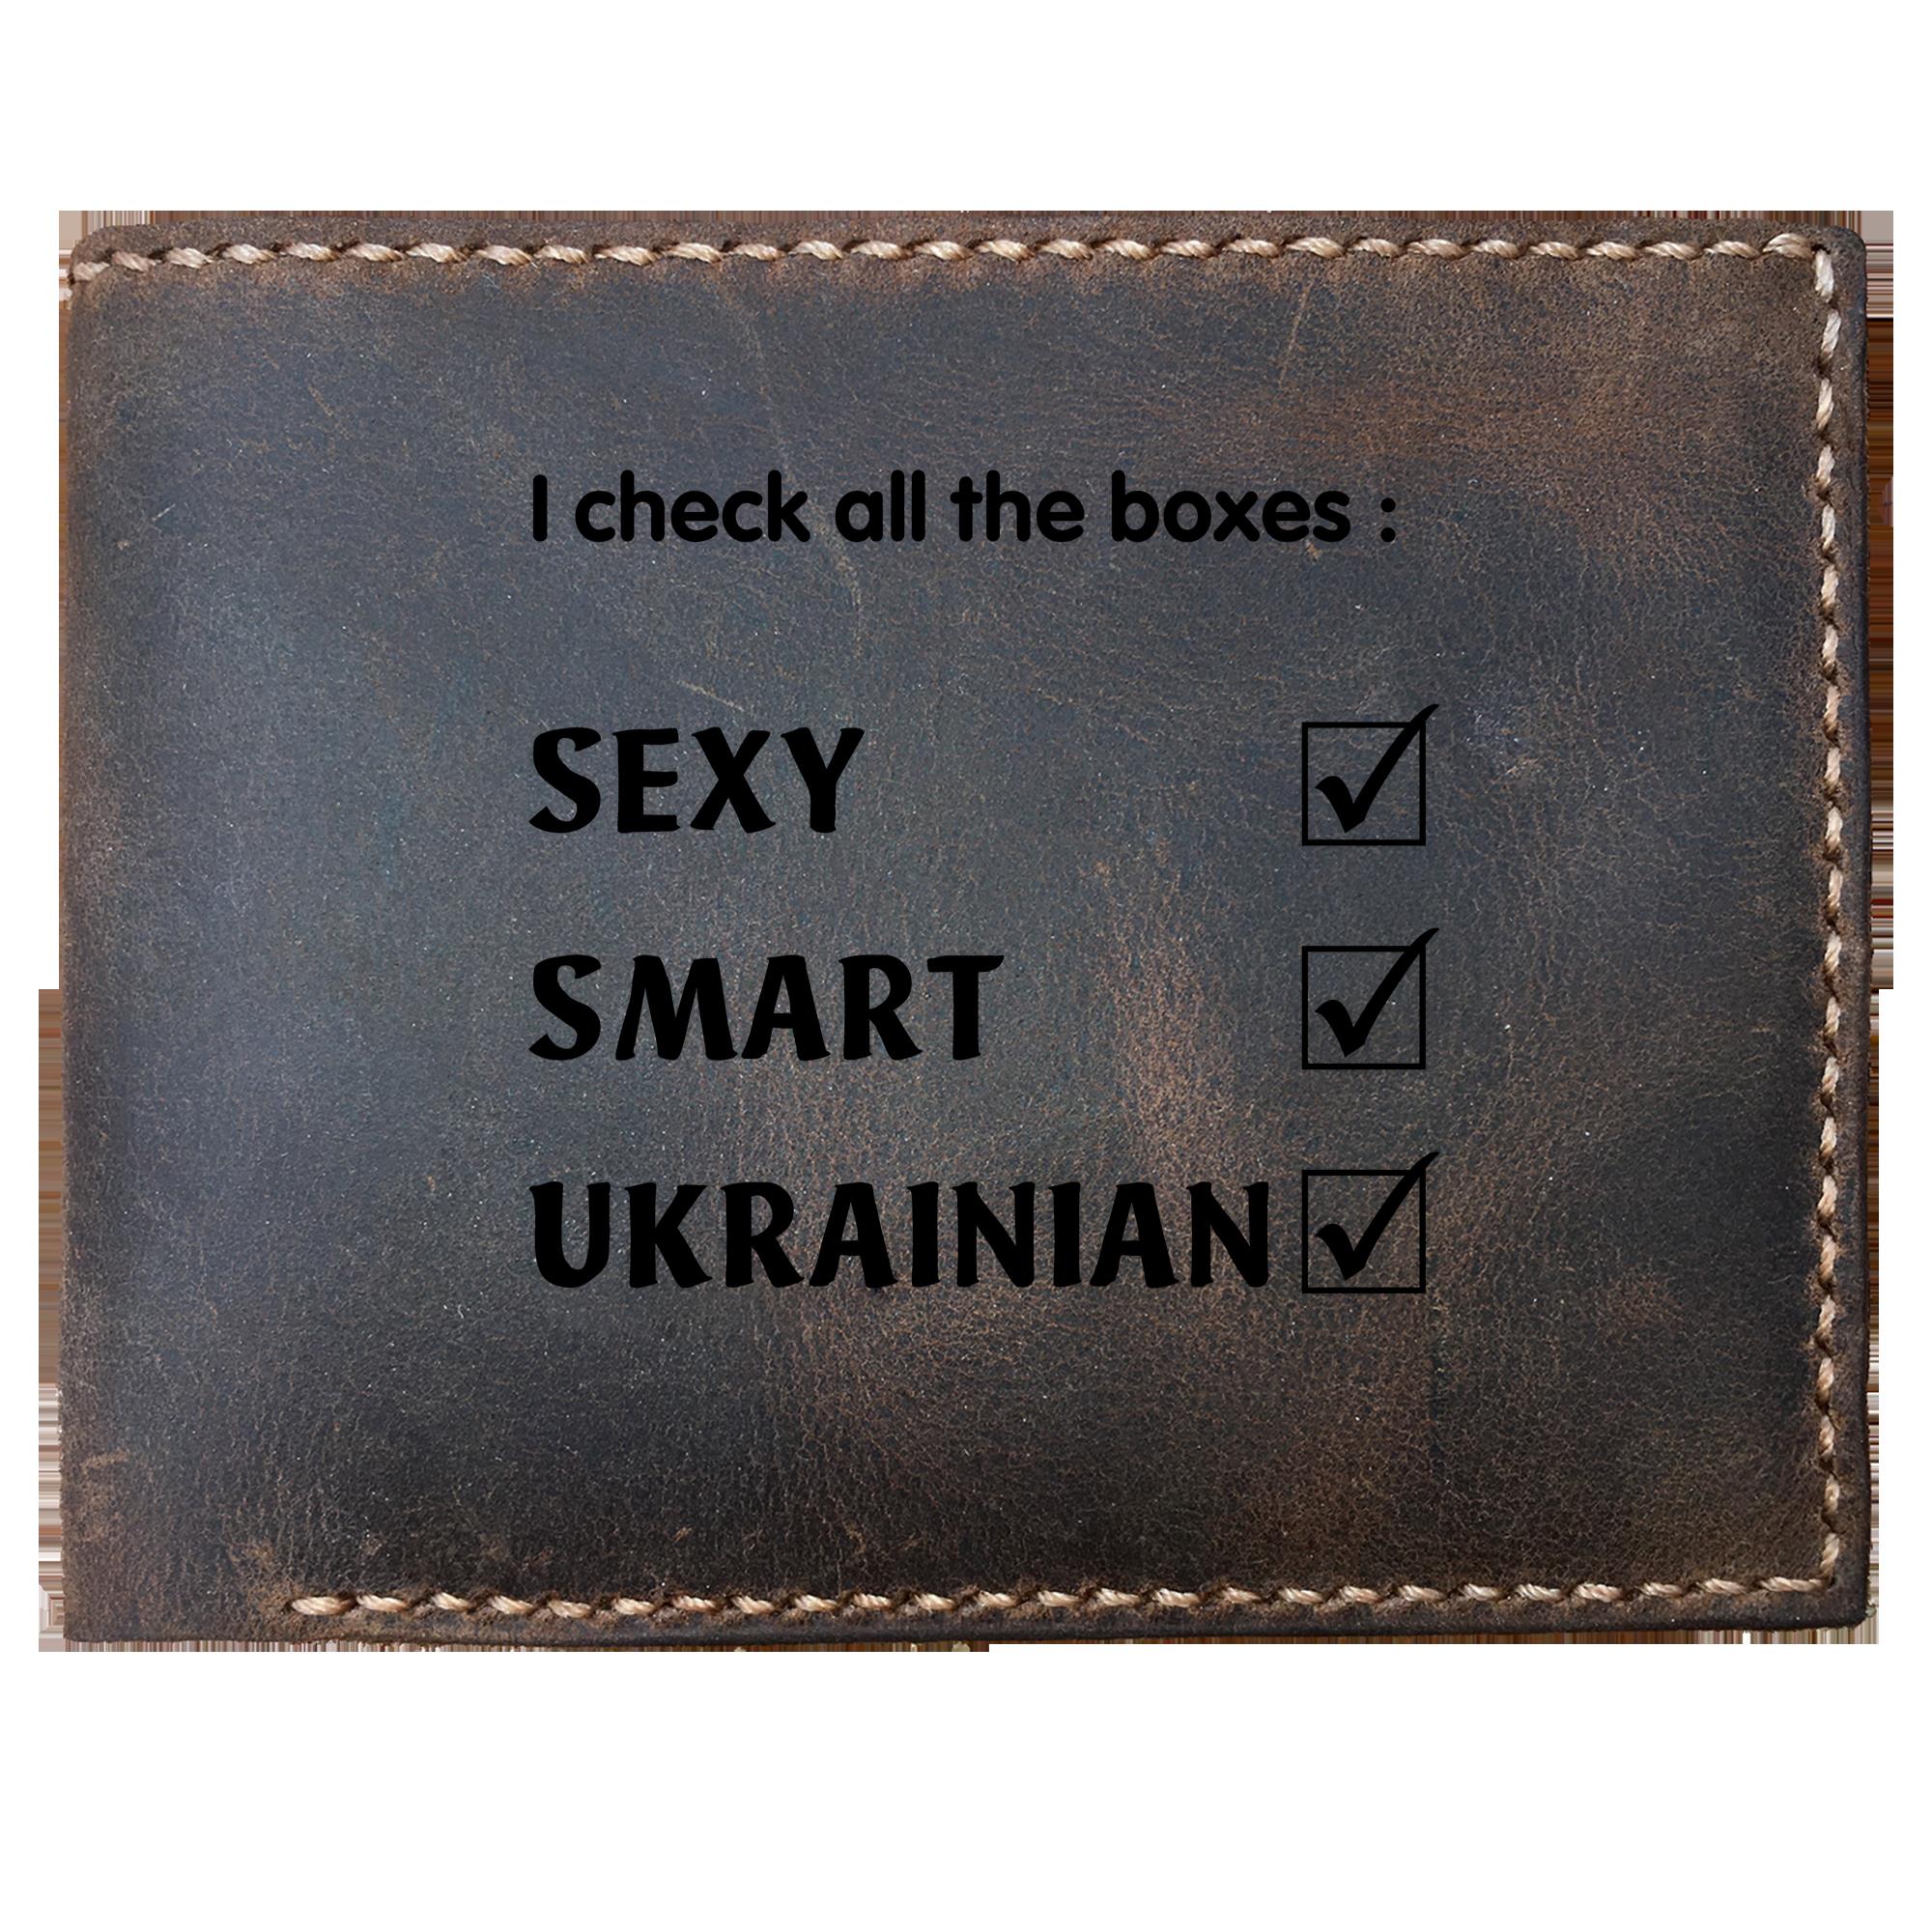 Skitongifts Funny Custom Laser Engraved Bifold Leather Wallet For Men, Funny For Ukrainian. Check All Boxes Sexy Smart Ukrainian